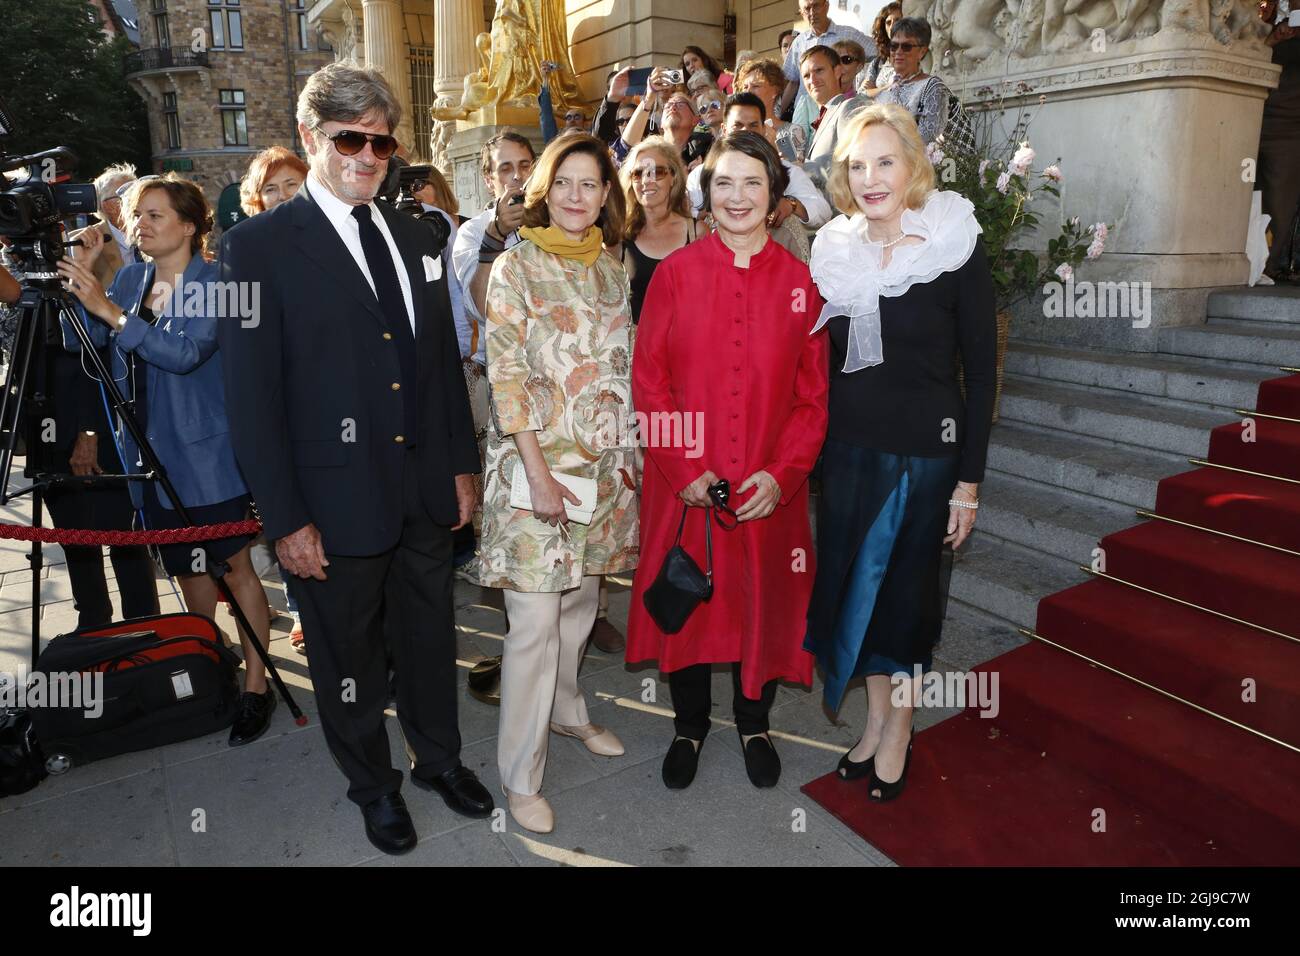 Actress Ingrid Bergman's four children (L-R) Roberto Rossellini, Ingrid Rossellini, Isabella Rossellini and Pia Lindstrom arrive at Dramaten Theatre in Stockholm, Sweden, on Aug. 24, 2015, for the Swedish premiere of the documentary 'Ingrid Bergman: In Her Own Words' on the occasion of the 100 anniversary gala of the birth of the late Swedish actress Ingrid Bergman.  Photo: Christine Olsson / TT / code 10430 Stock Photo